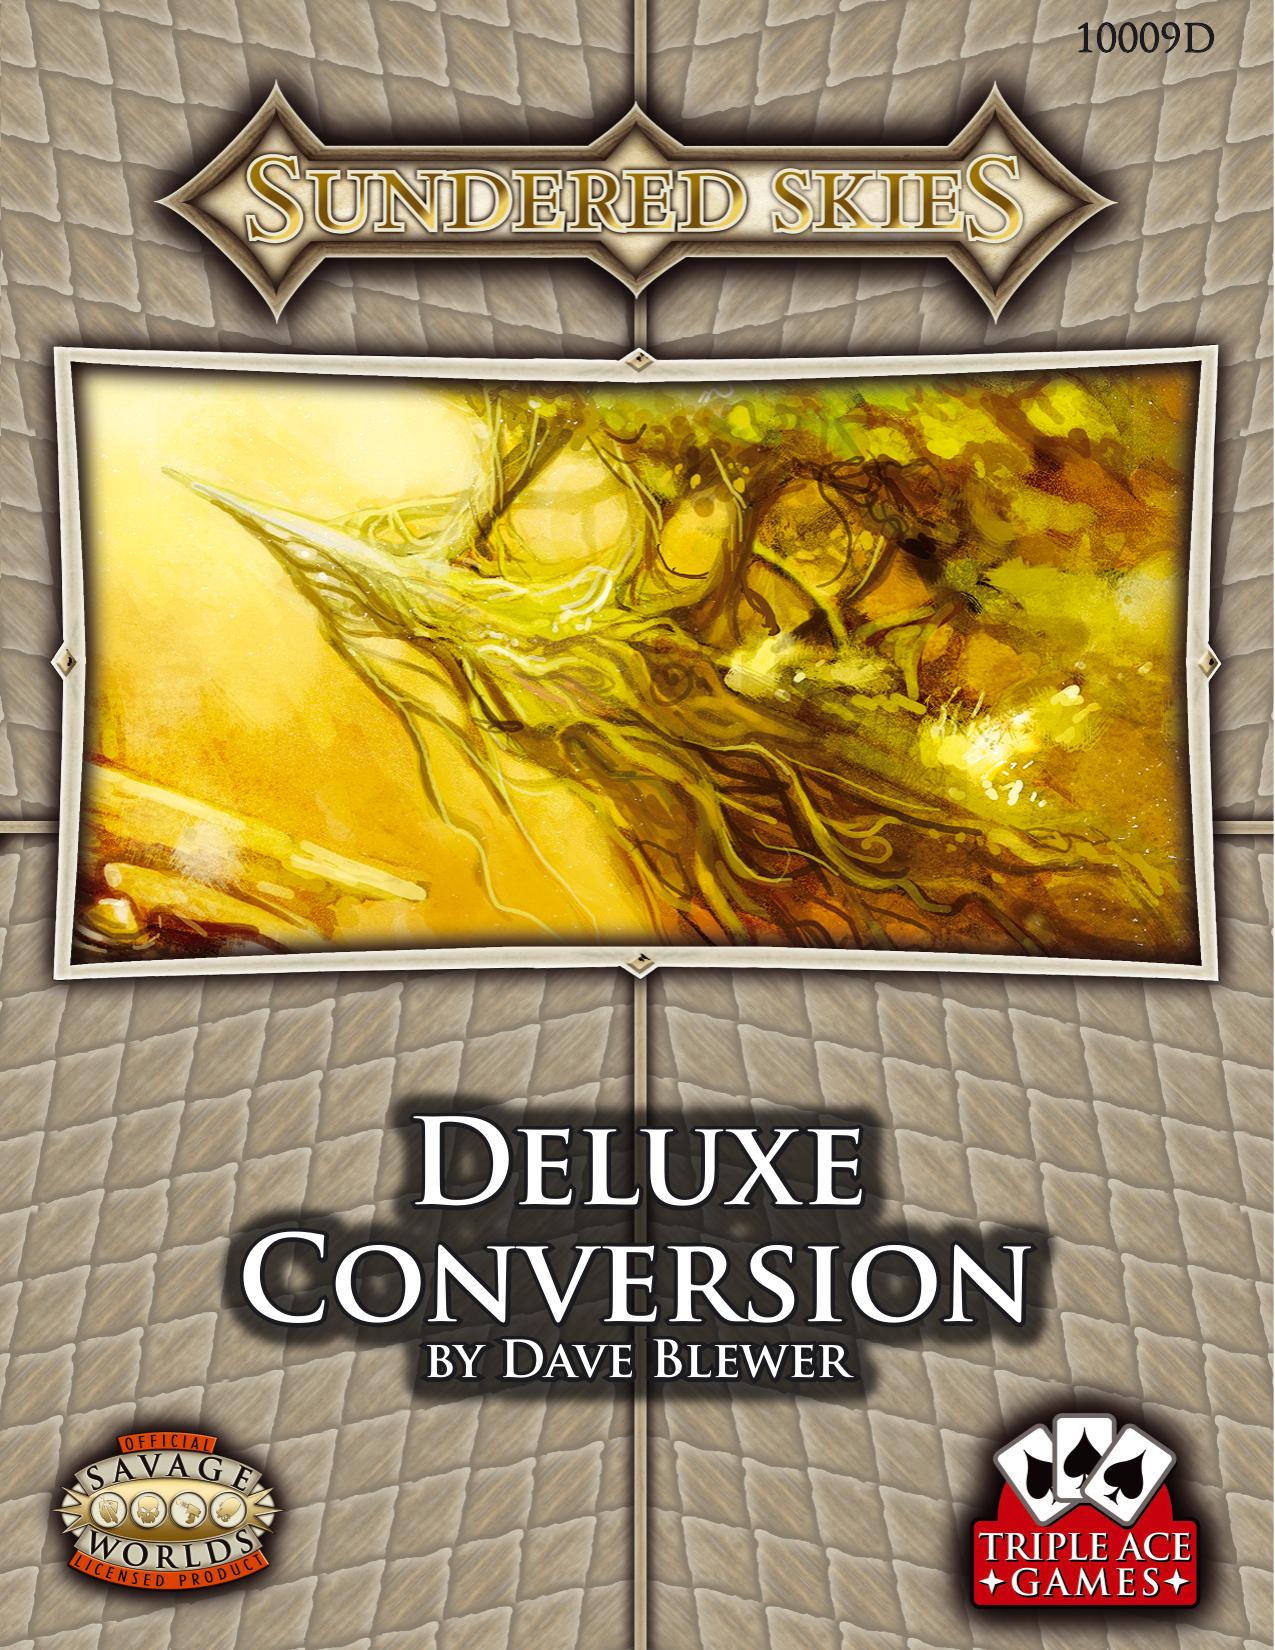 Sundered Skies Deluxe Conversion